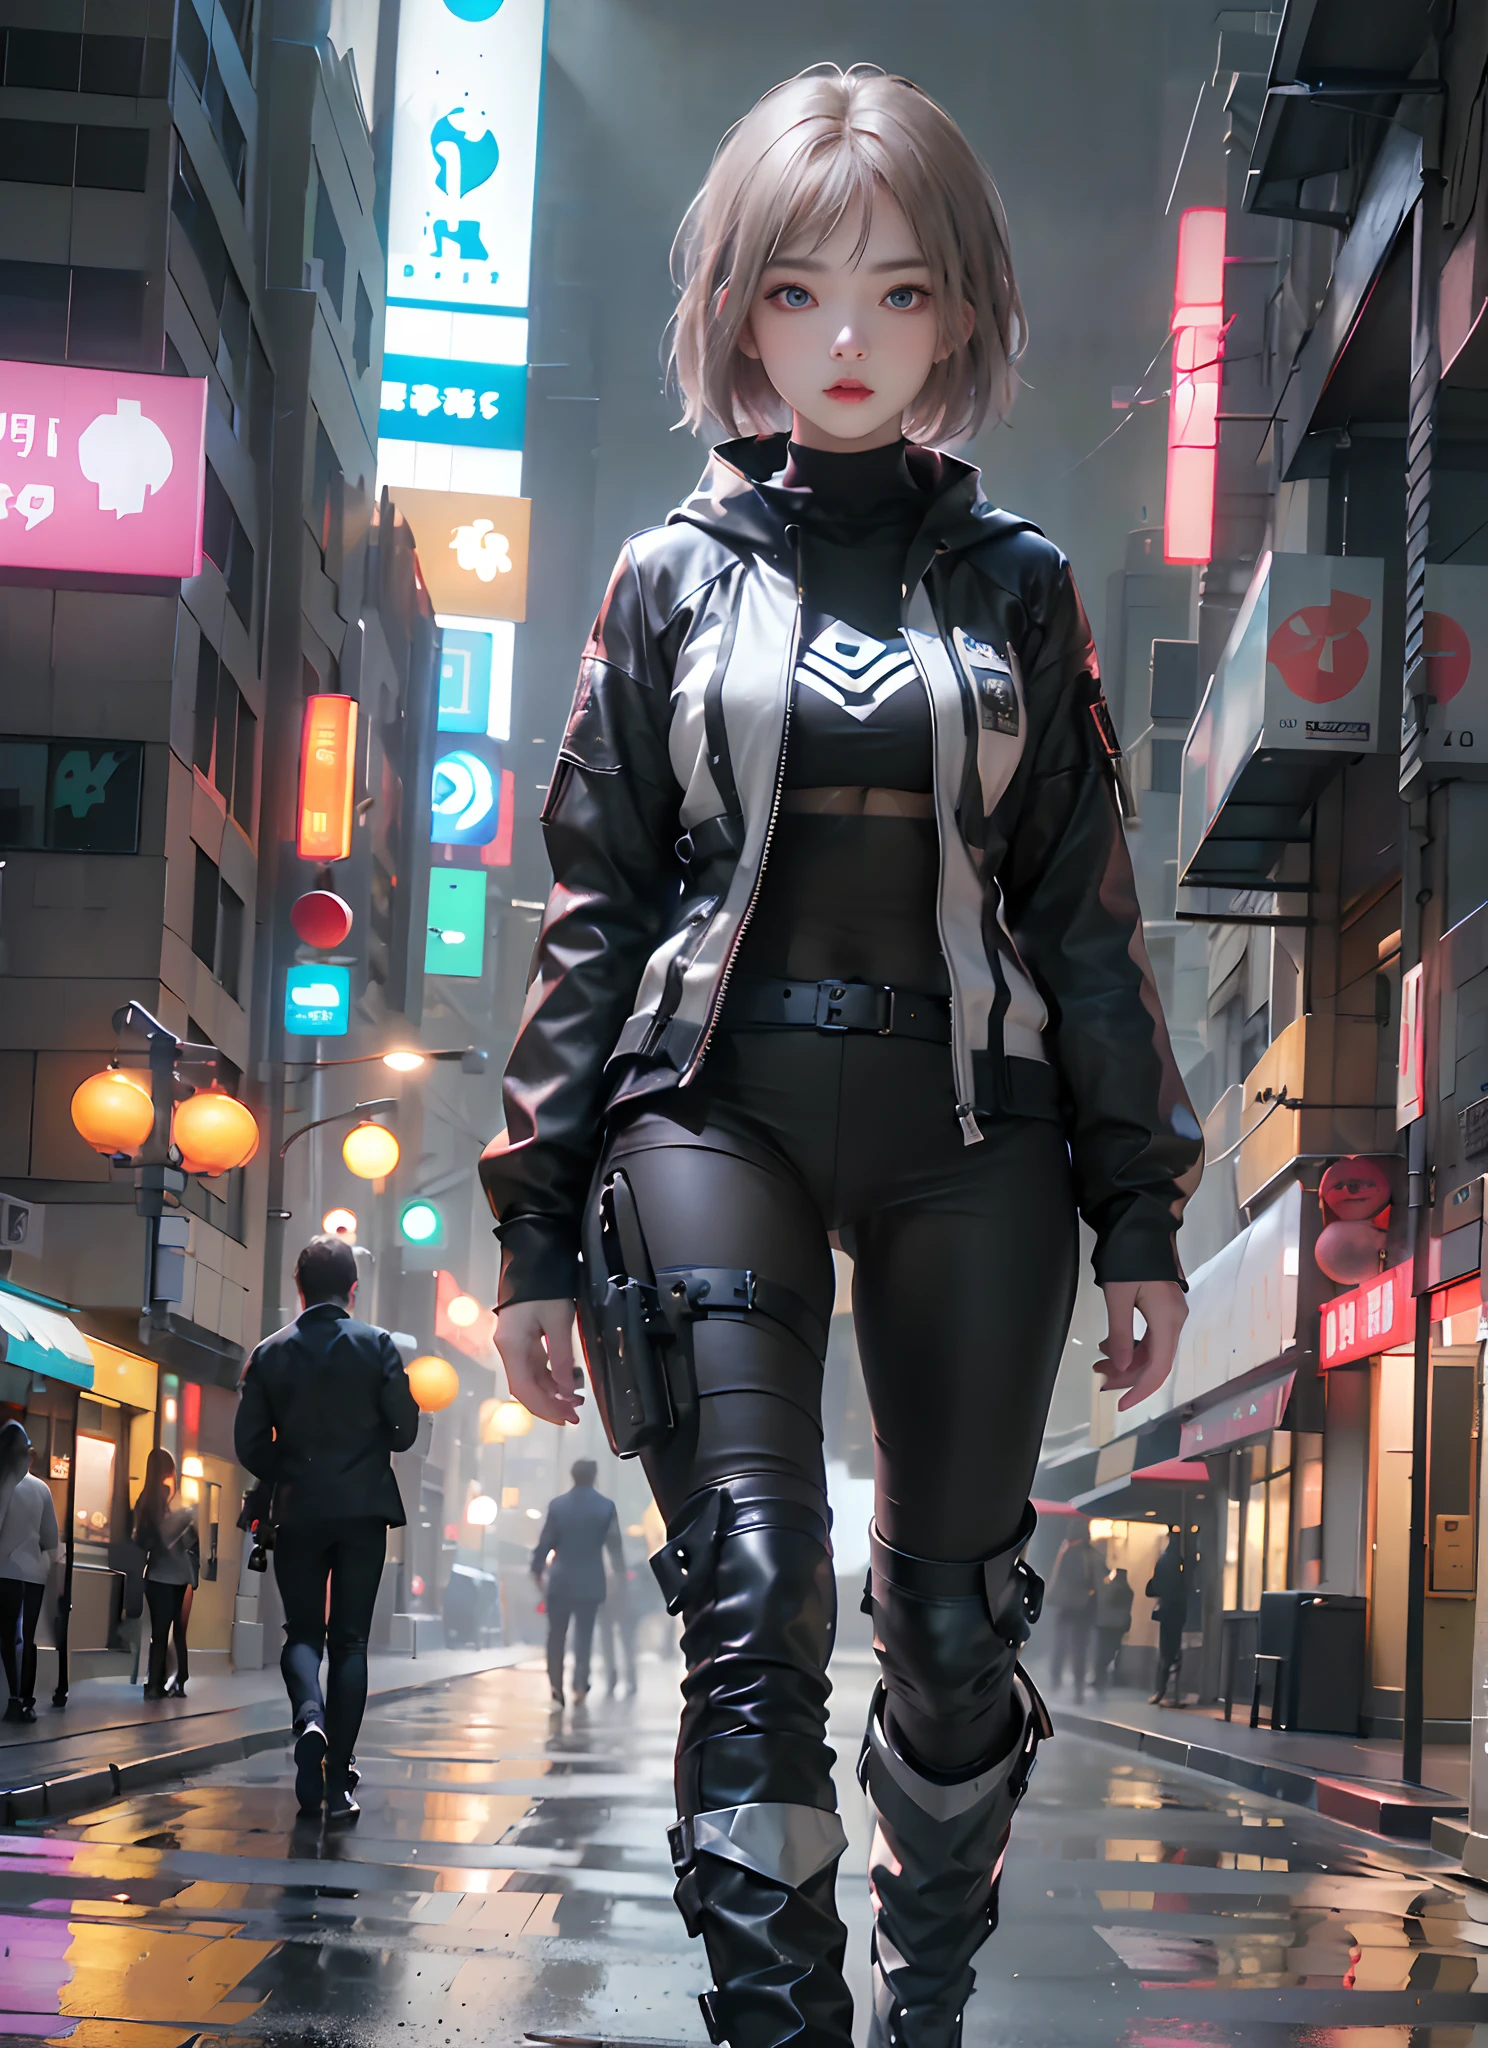 ((top-quality)), (((​masterpiece)), (detaileds: 1.4), 3D, Beautiful Cyberpunk Woman Image, bob cuts, Broken black tights, leather clothes, Electromechanical, nffsw(HighDynamicRange), Ray traching, NVIDIA RTX, Hyper-Resolution, Unreal 5, Sub-surface scattering, PBR Texture, Postprocess, Anisotropy Filtering, depth of fields, Maximum sharpness and acutance, Multilayer Texture, Albedo and Highlight Maps, Surface Coloring, Accurate simulation of light-material interactions, perfectly proportions、octane renderings、two tone lighting、Large aperture、Low ISO、White Balance、thirds rule、8K Raw、​masterpiece、top-quality、(8k extremely detailed CG unit wallpaper)(top-quality)、(The best illustrations)、(Best Shadows), innocent blue eyes, body swimsuit, poni hair